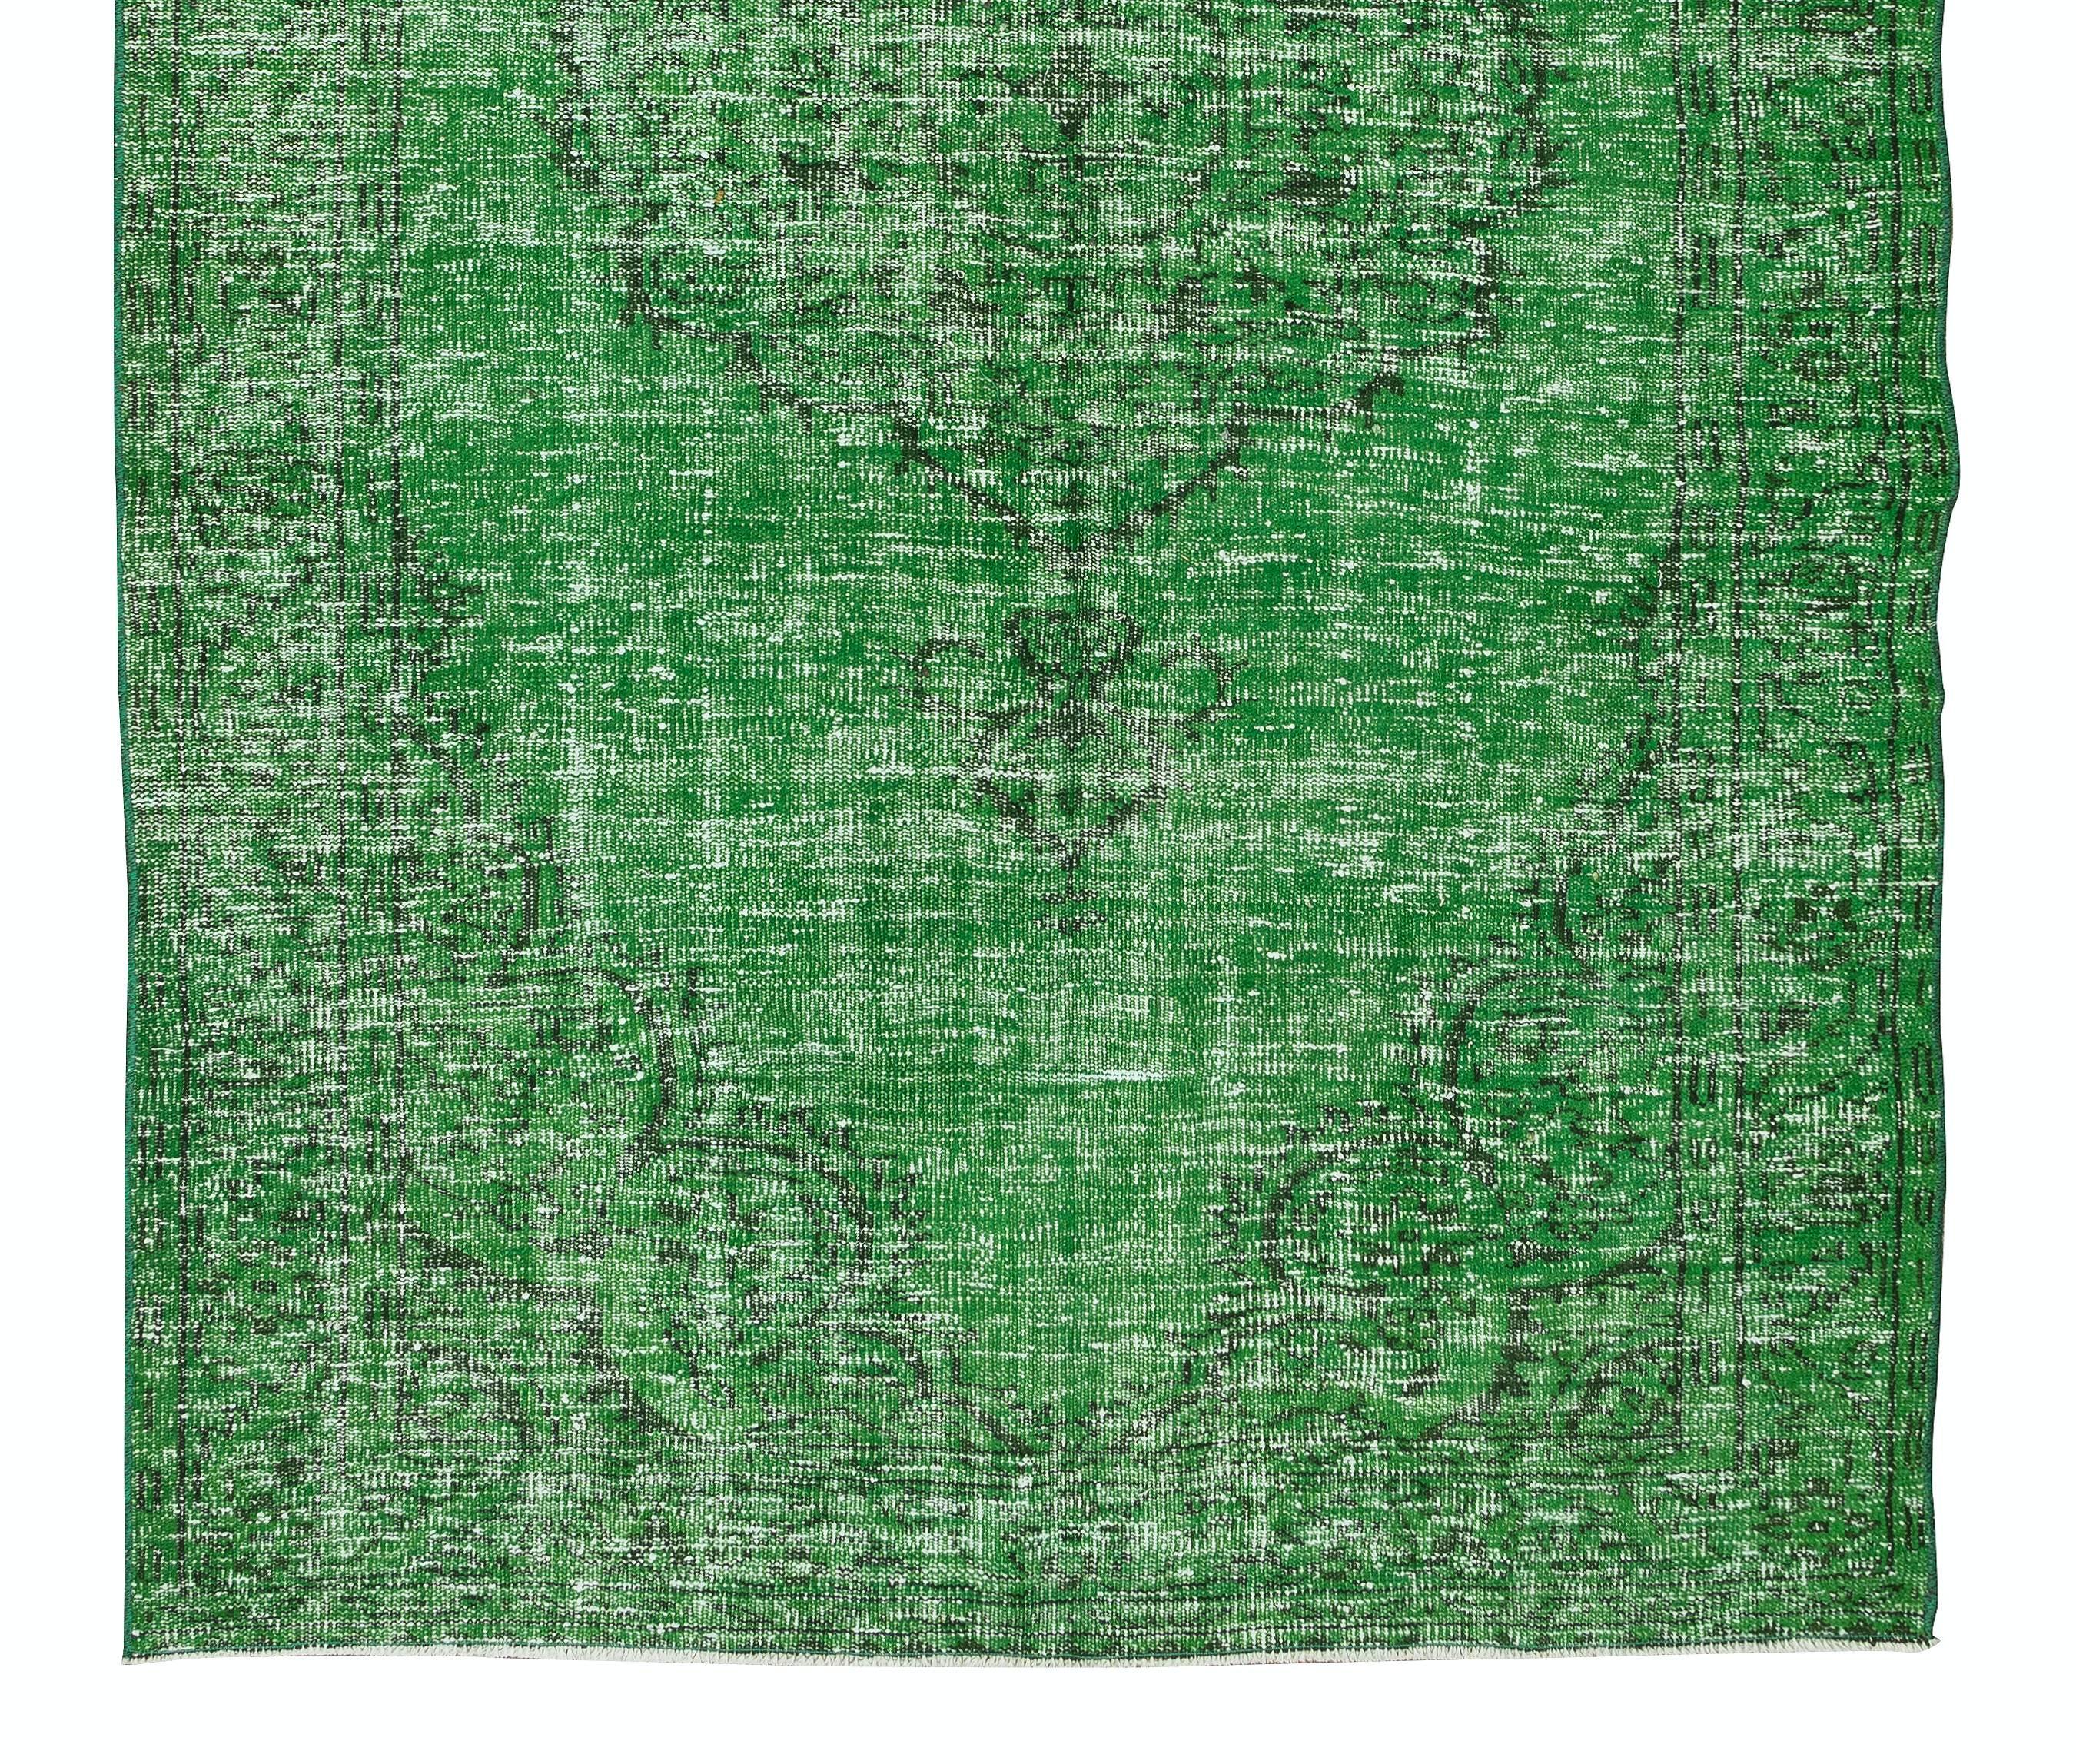 Hand-Woven 5.2x9.3 Ft Vintage Anatolian Area Rug, Green Handmade Contemporary Wool Carpet For Sale